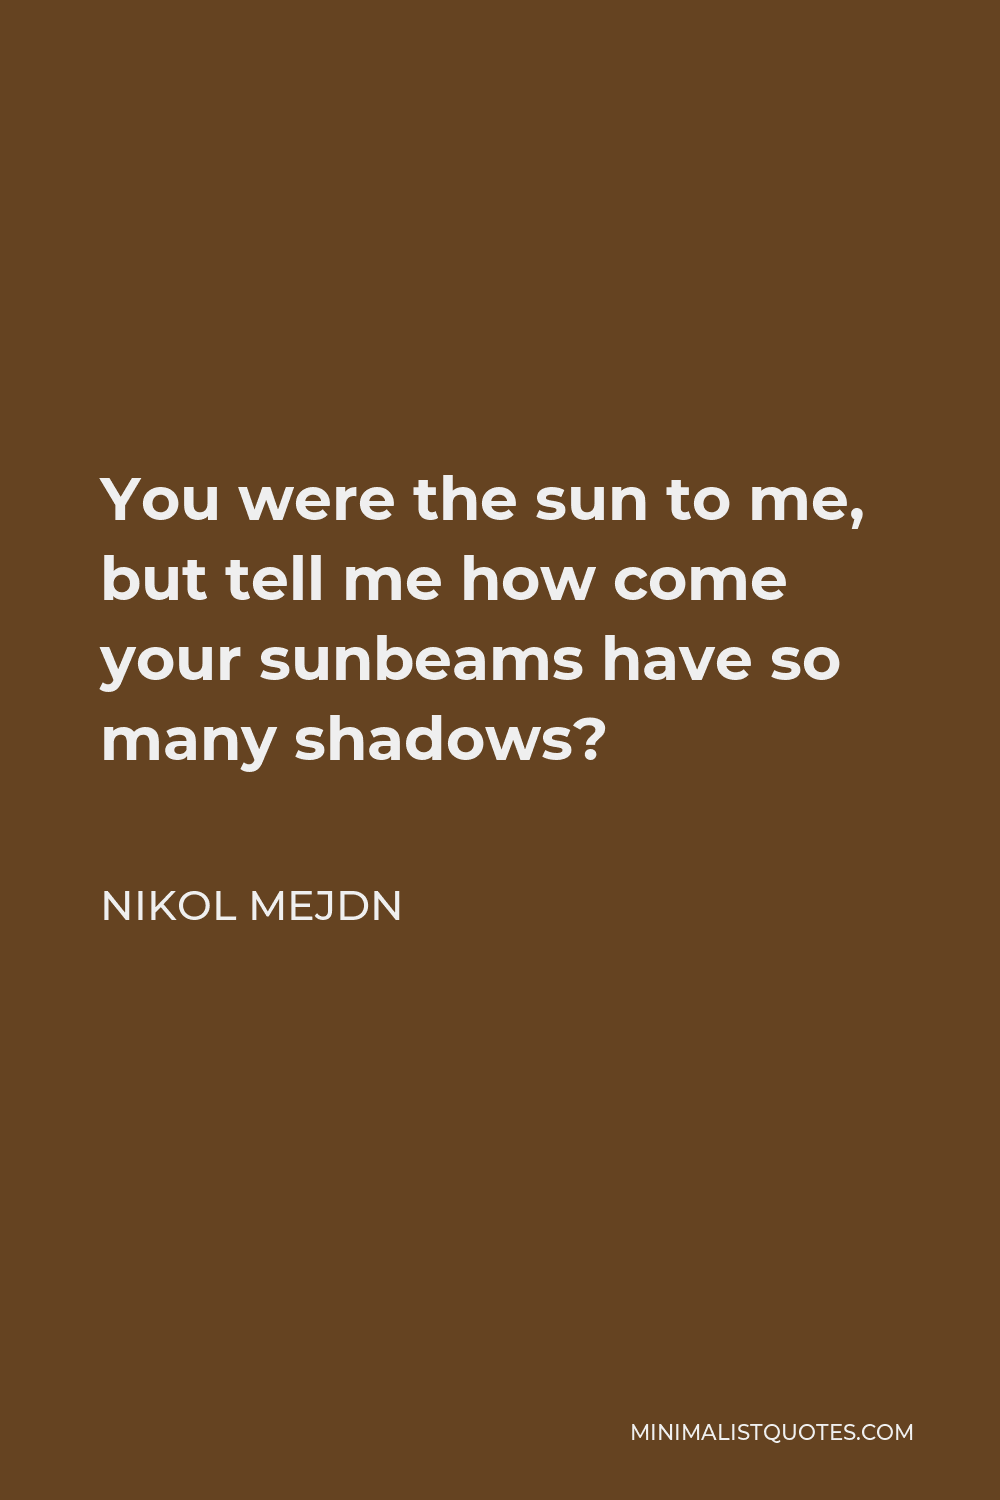 Nikol Mejdn Quote - You were the sun to me, but tell me how come your sunbeams have so many shadows?